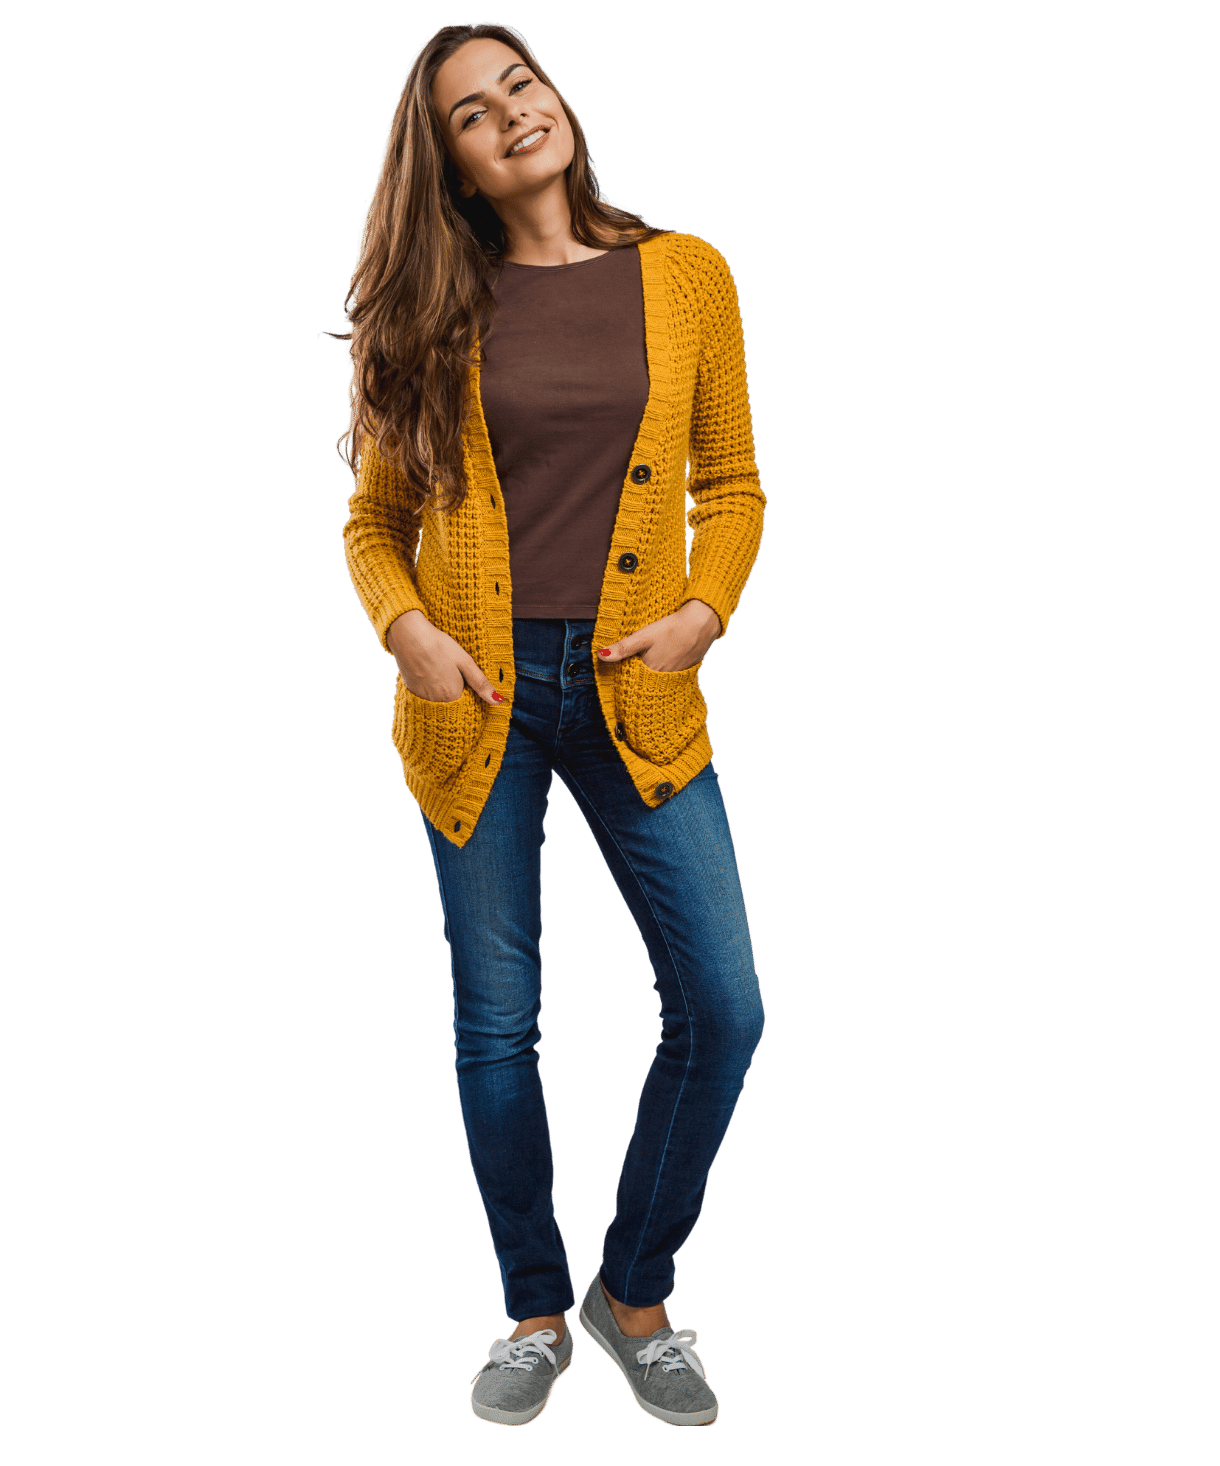 Woman in yellow jacket smiling happily